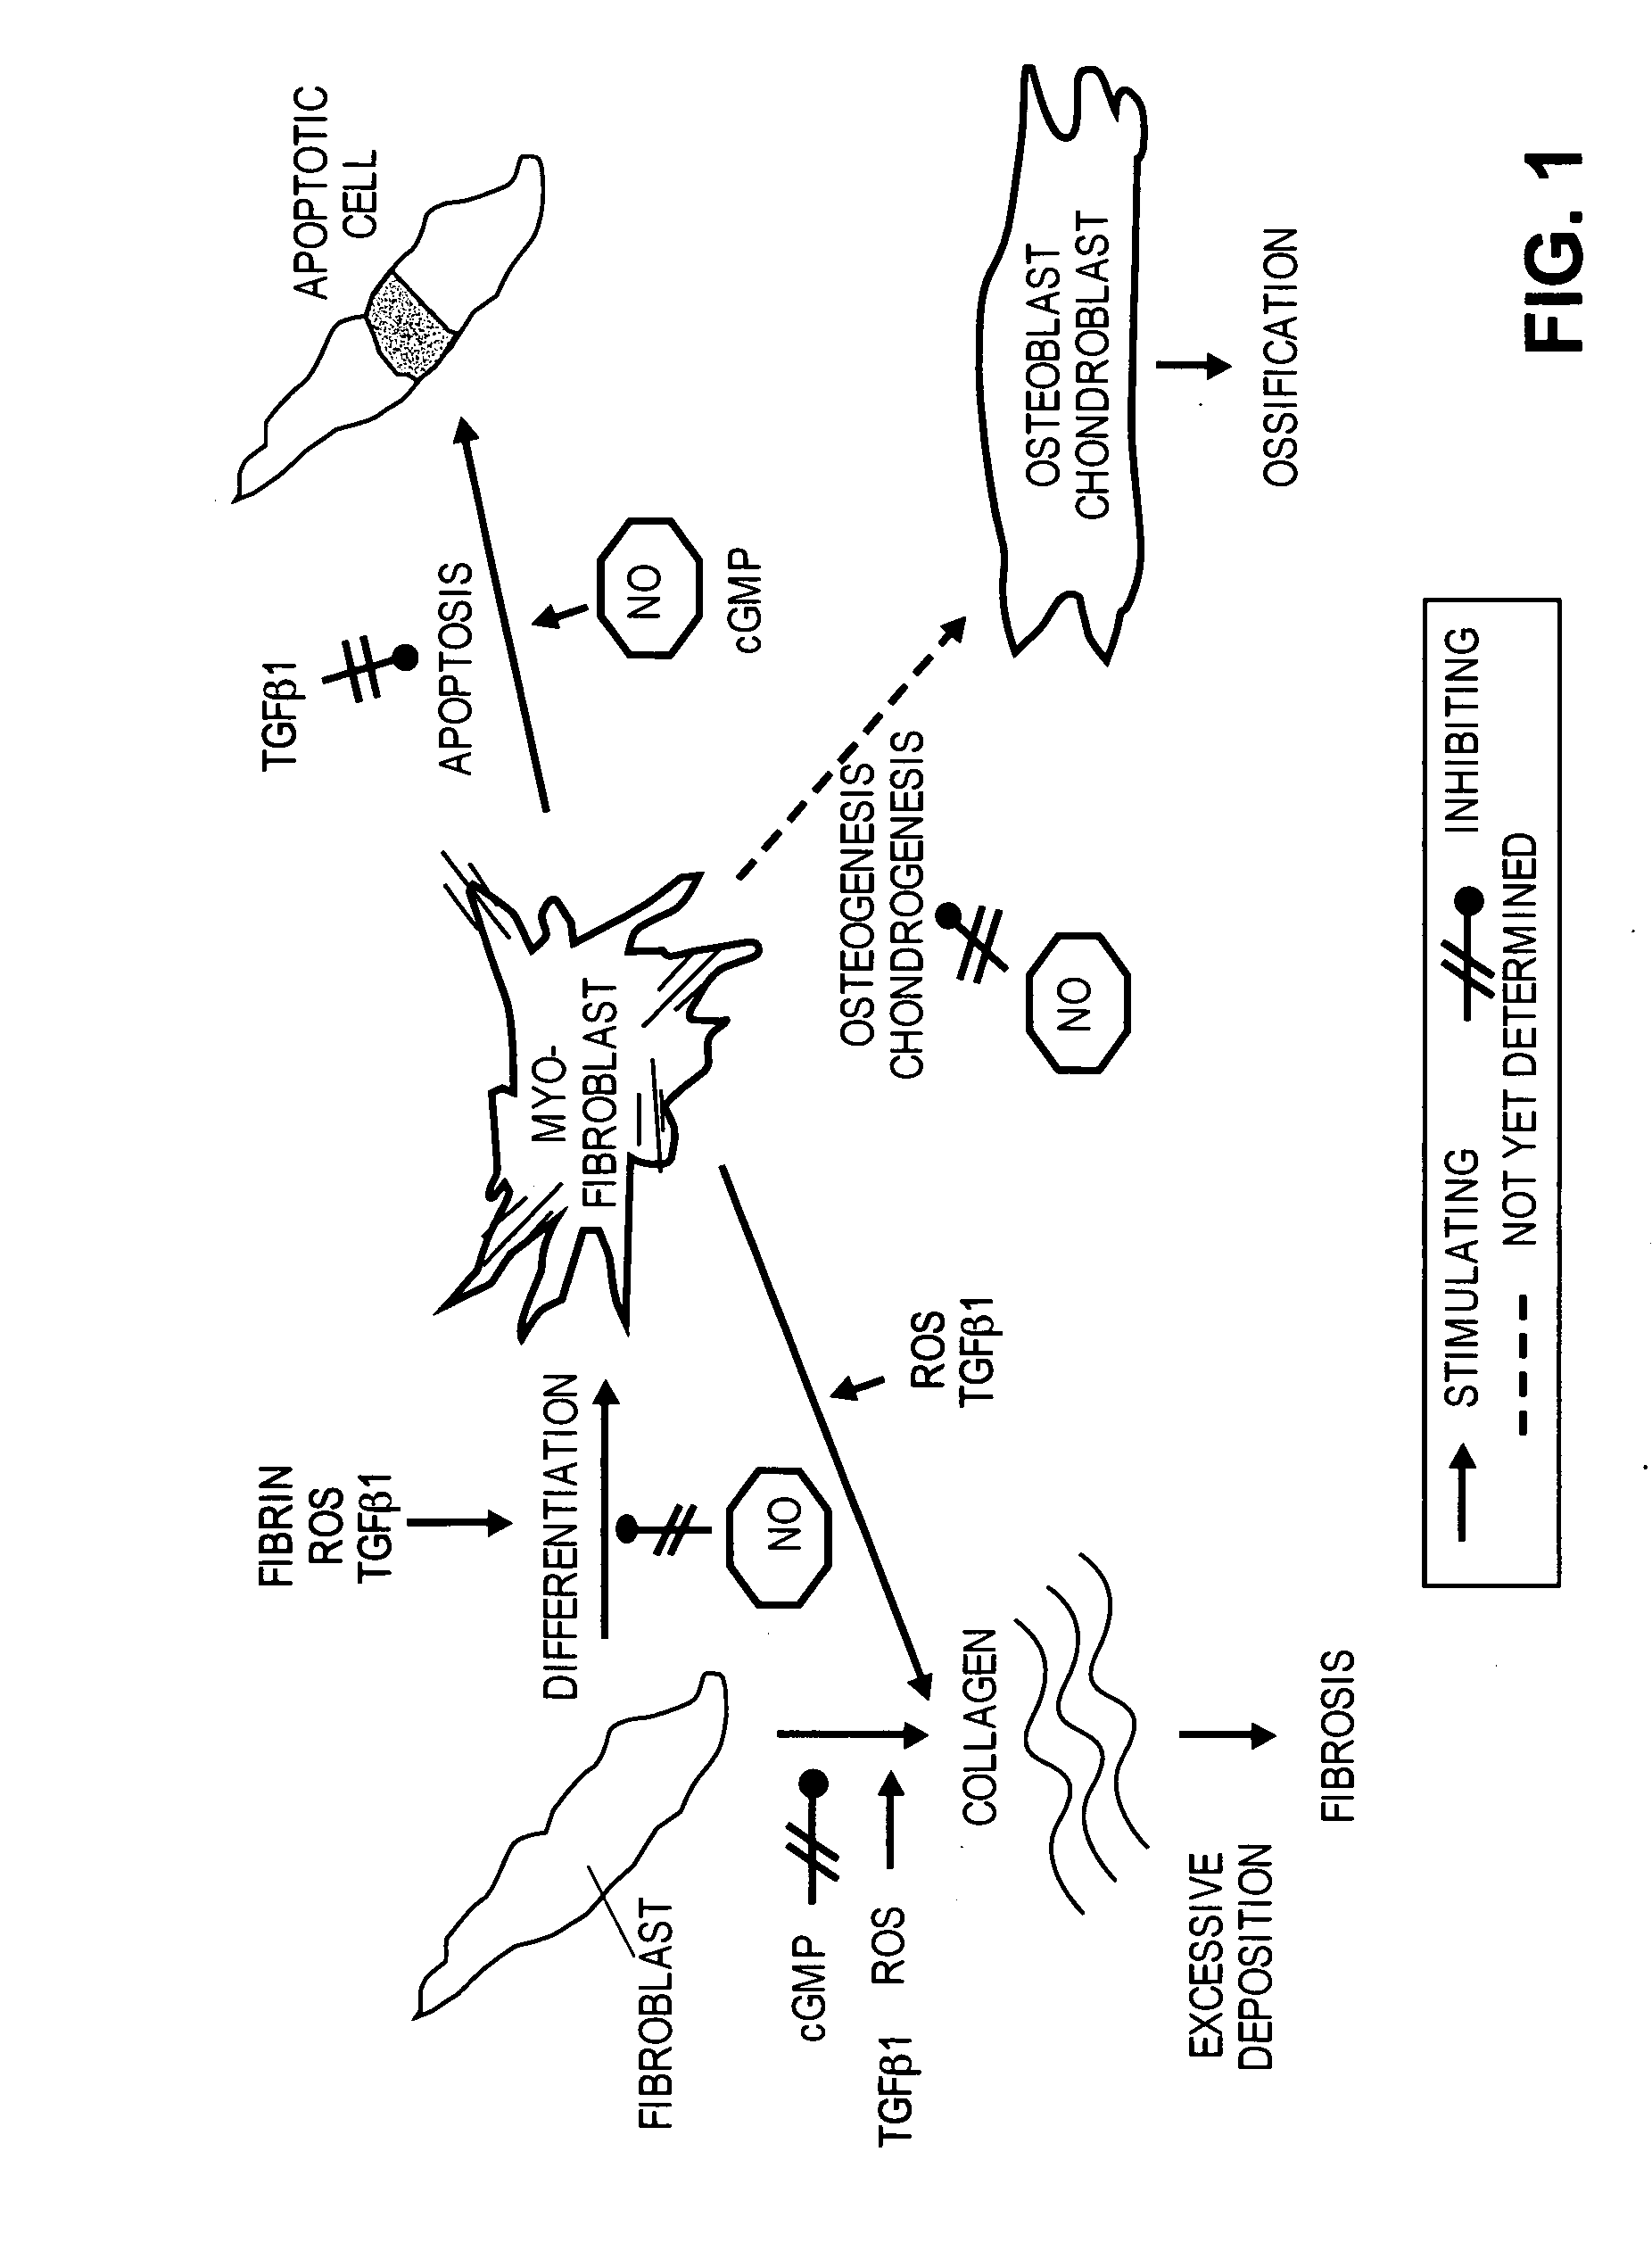 Methods of use of inhibitors of phosphodiesterases and modulators of nitric oxide, reactive oxygen species, and metalloproteinases in the treatment of peyronie's disease, arteriosclerosis and other fibrotic diseases